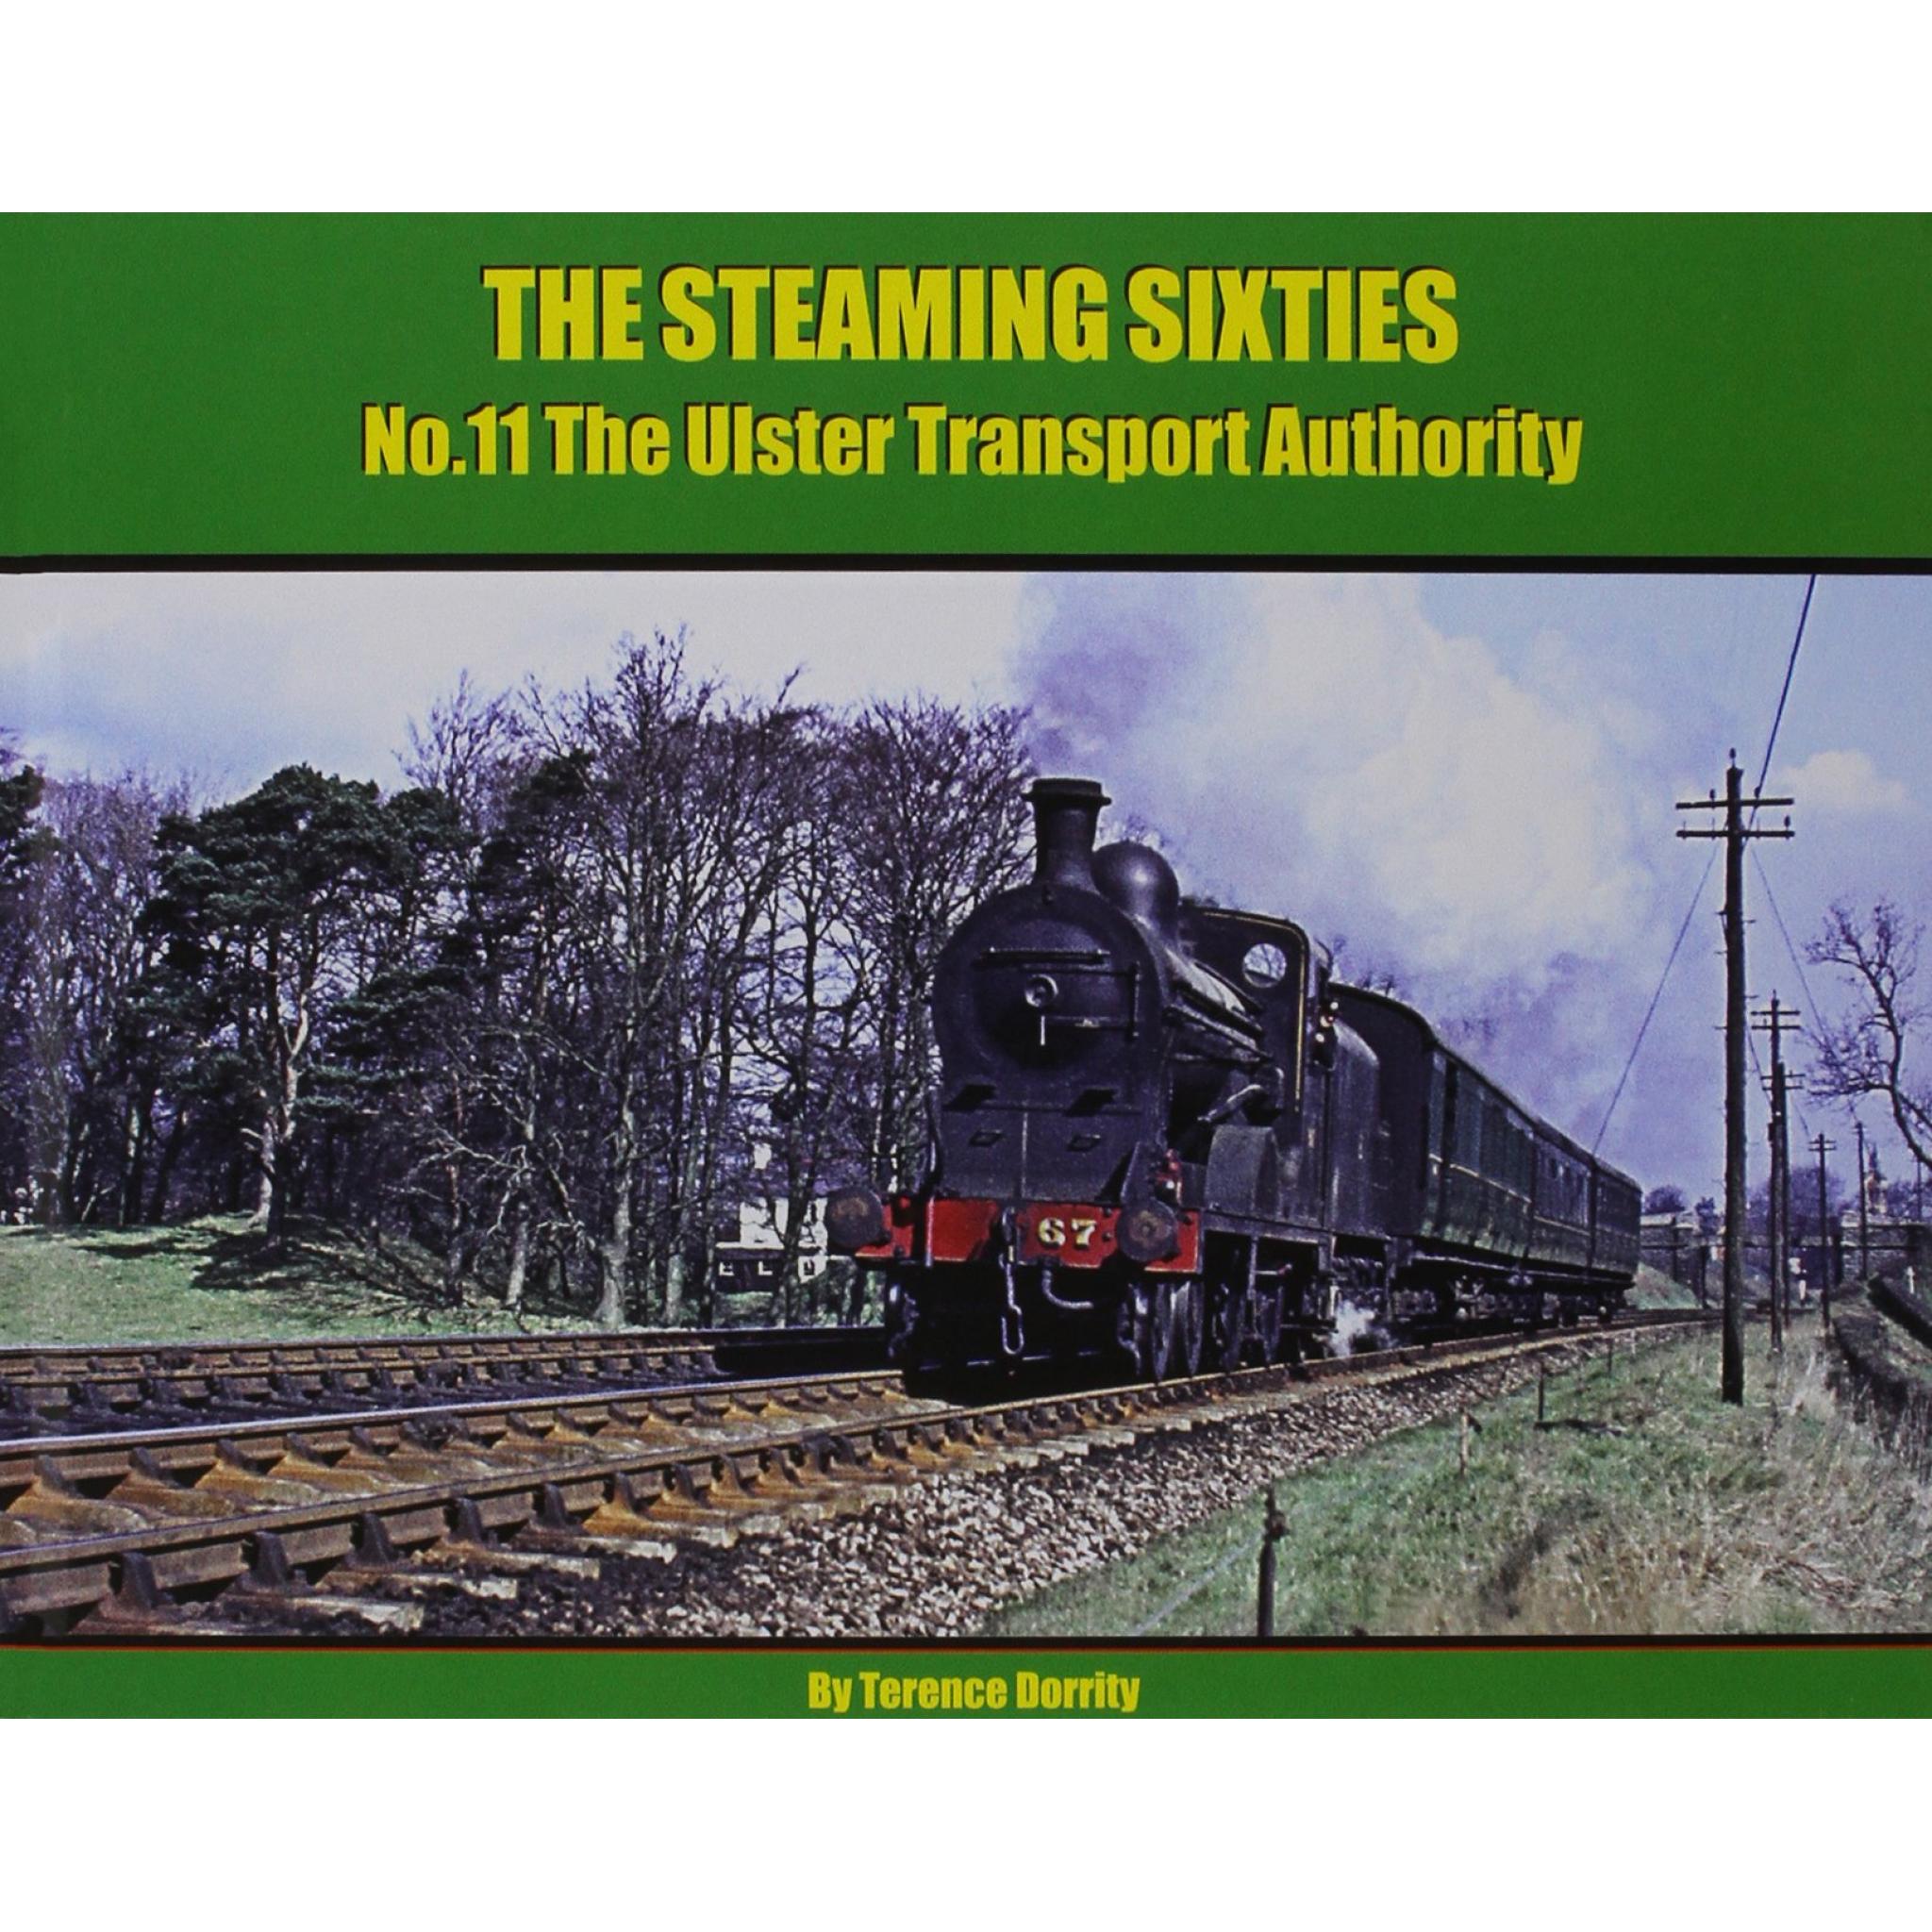 70% OFF RRP is £12.99  THE STEAMING SIXTIES No.11 The Ulster Transport Authority